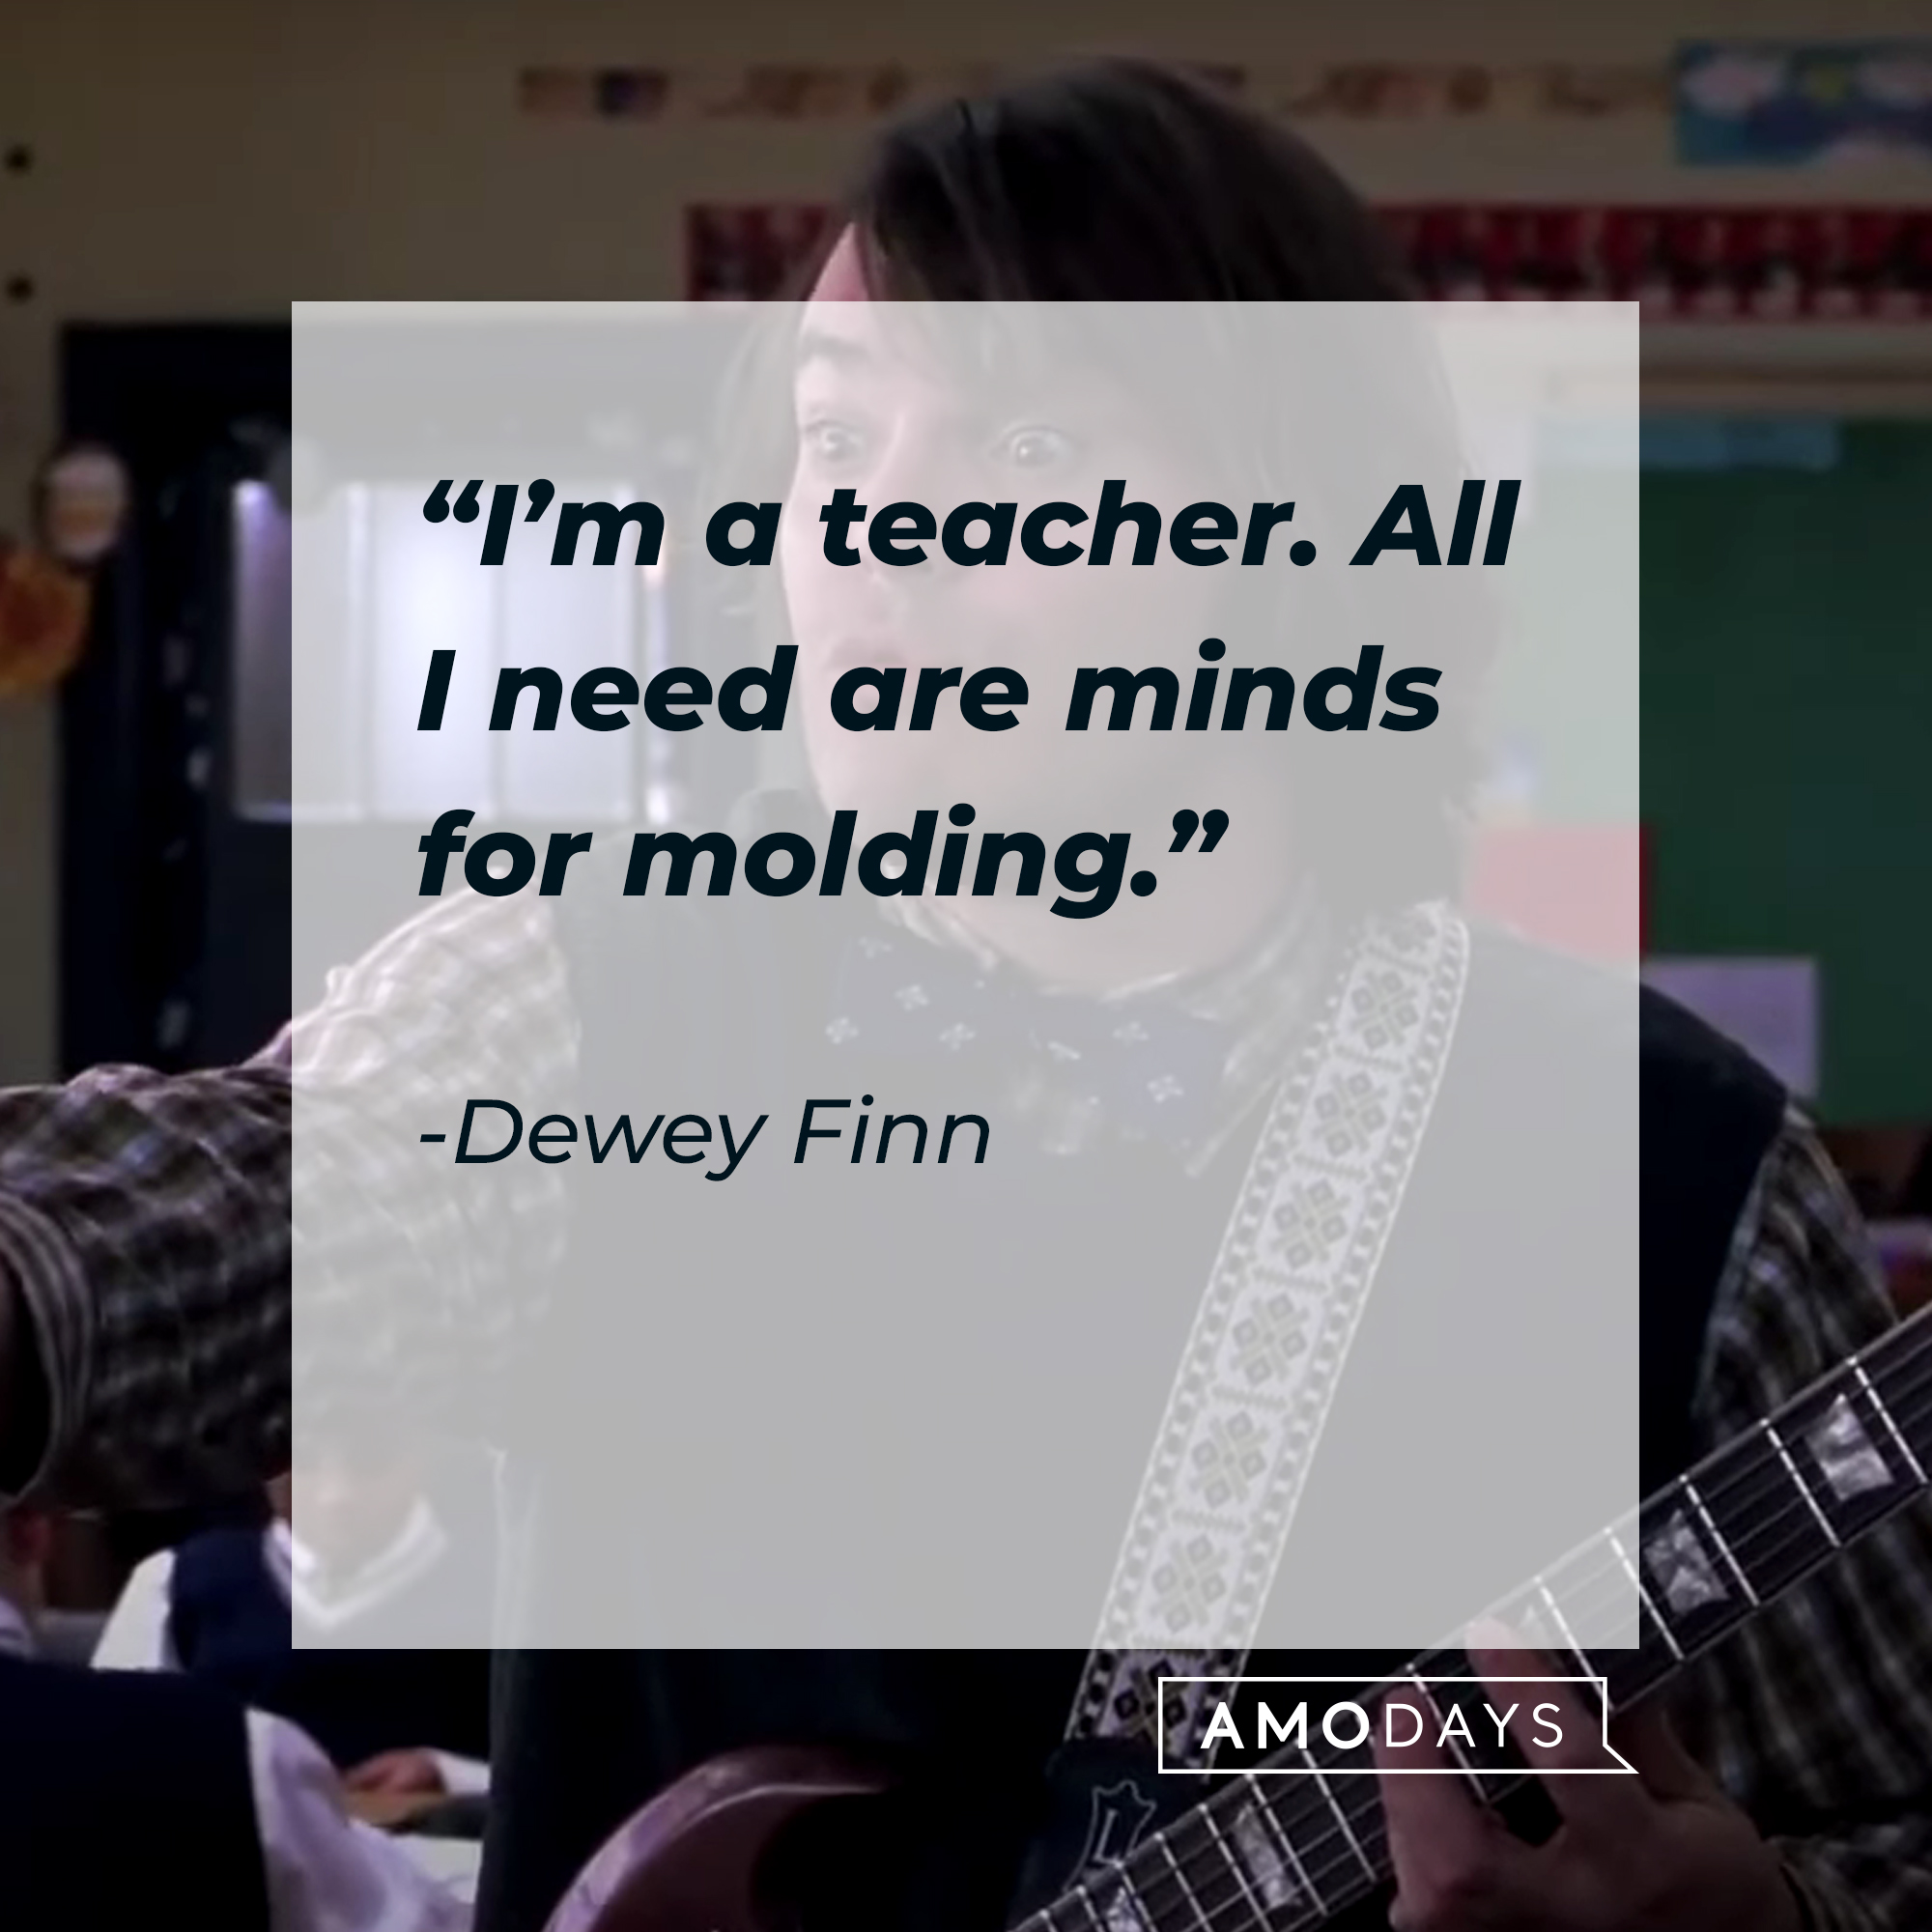 Dewey Finn, with his  quote: “I’m a teacher. All I need are minds for molding.”| Source: youtube.com/paramountpictures